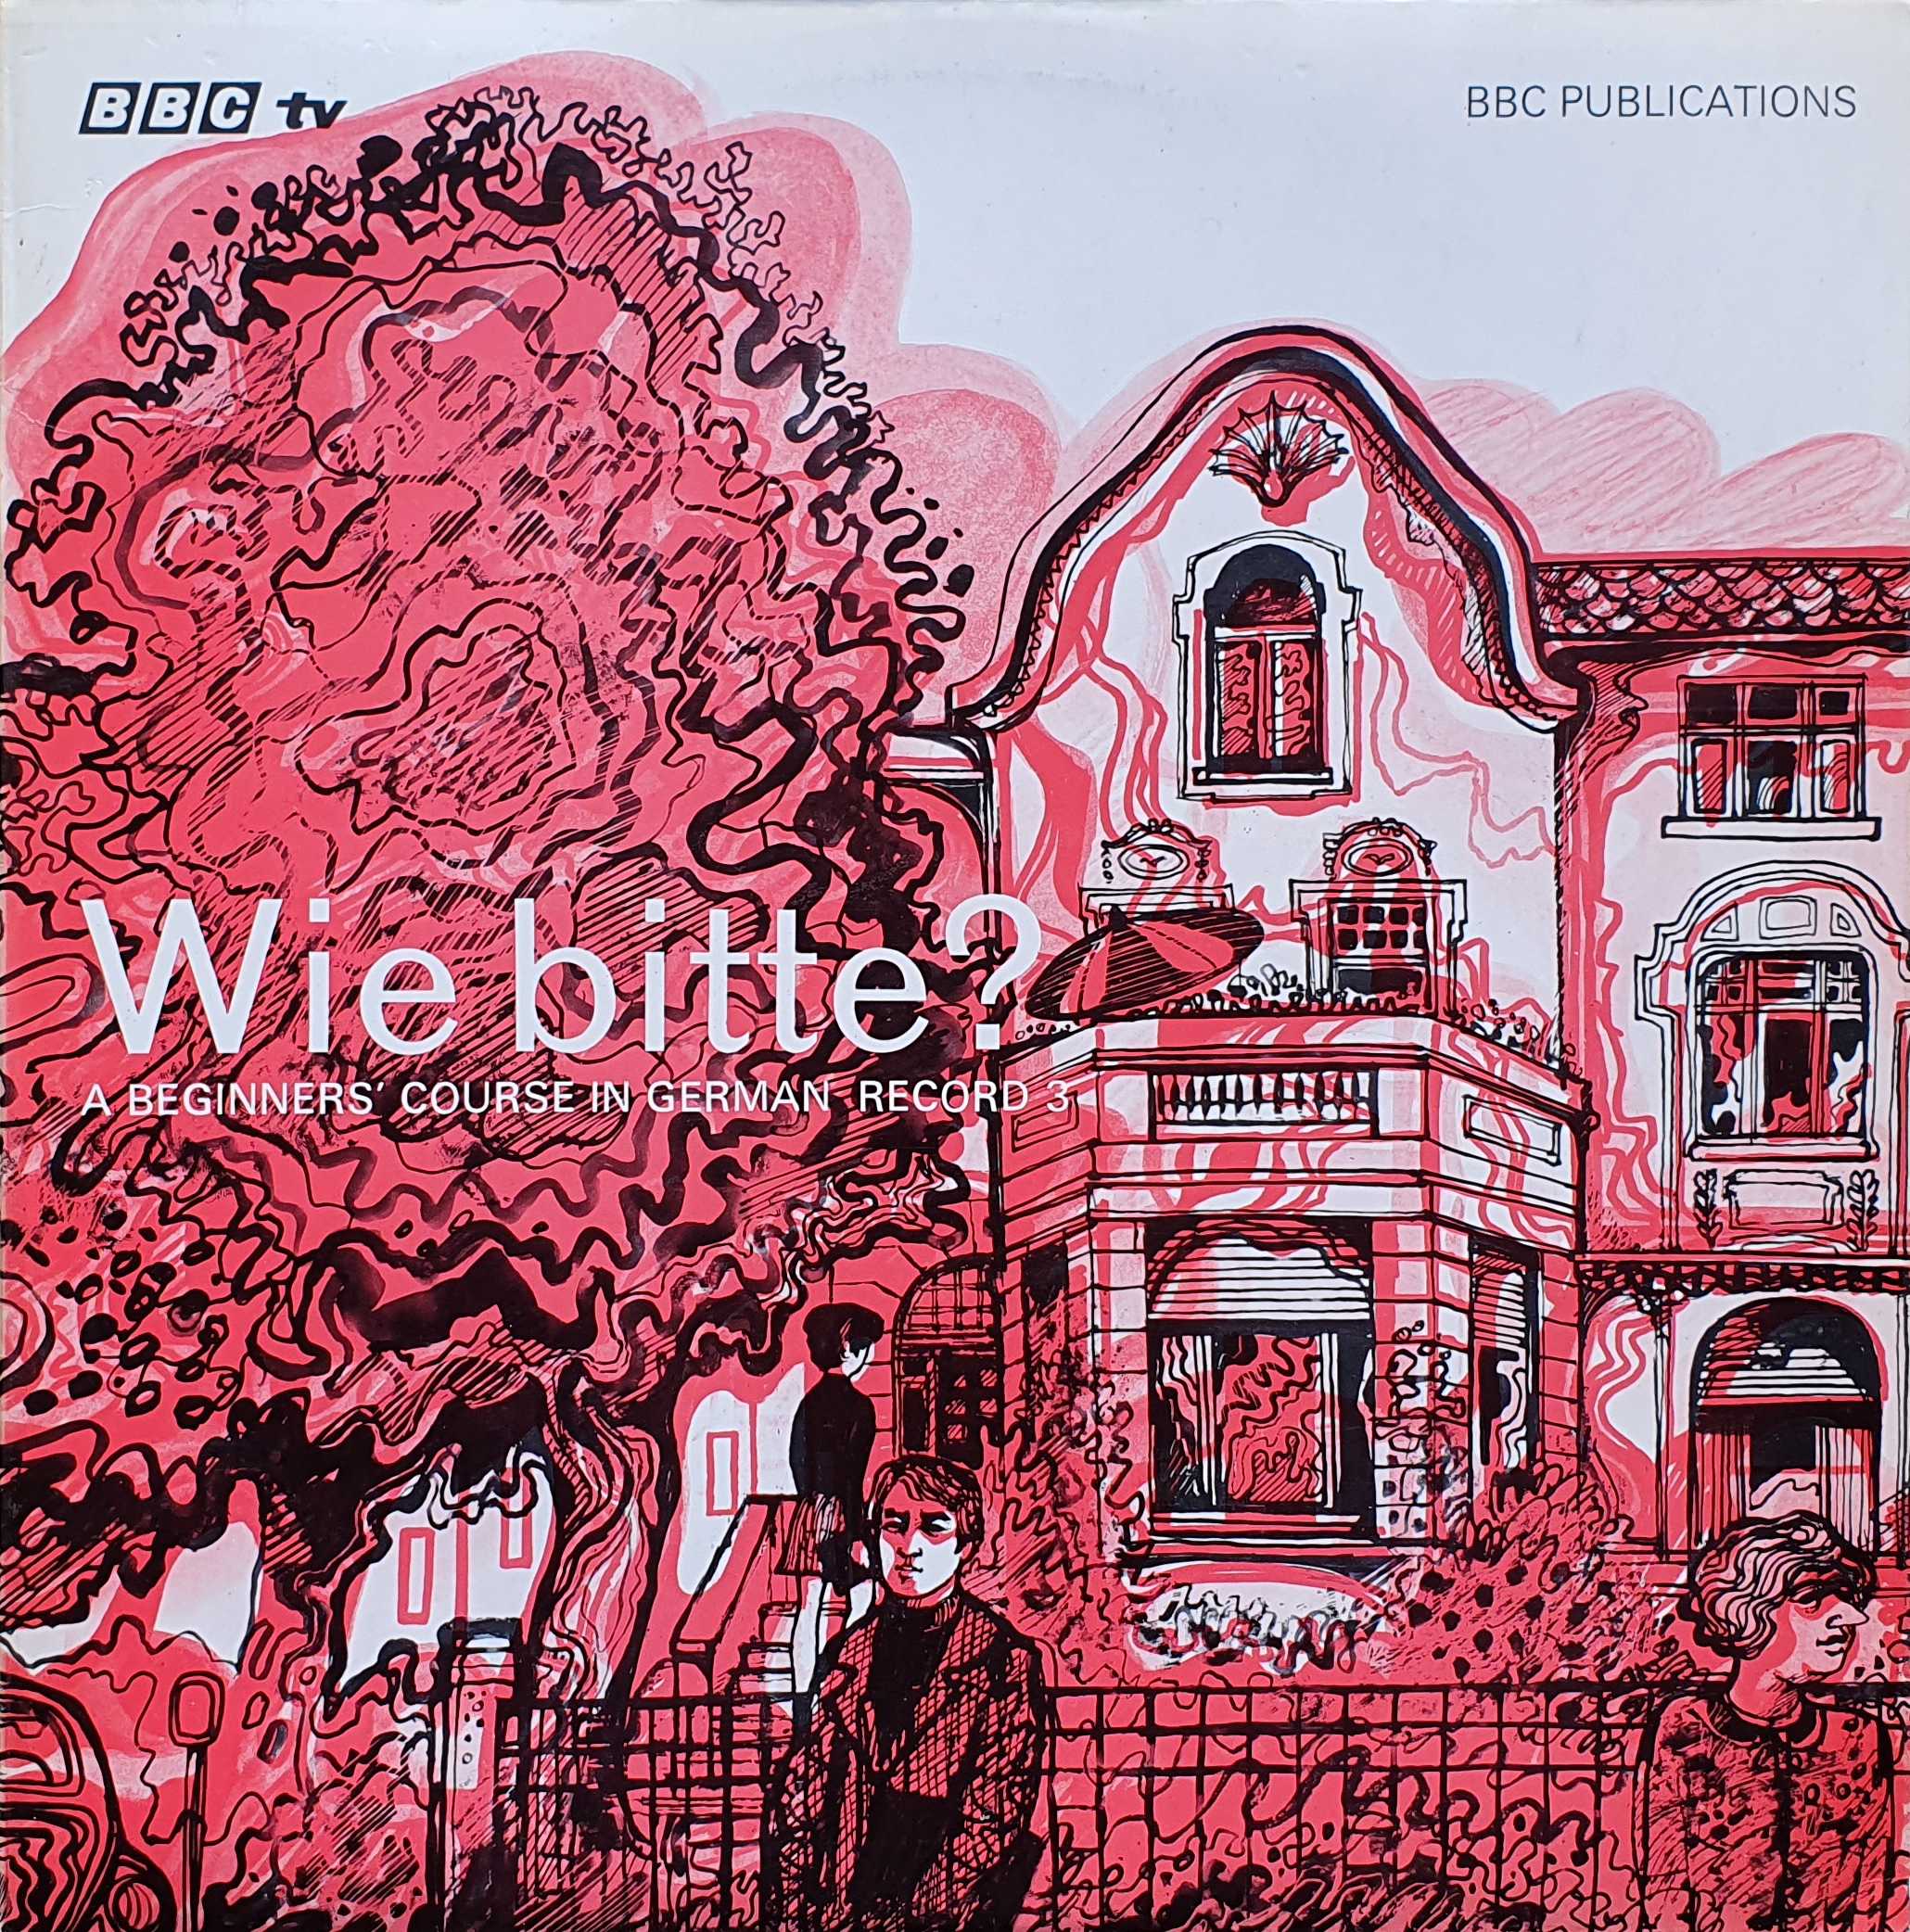 Picture of OP 137/138 Wie bitte? A beginners' course - 3 by artist Milo Sperber / Antony Peck from the BBC albums - Records and Tapes library